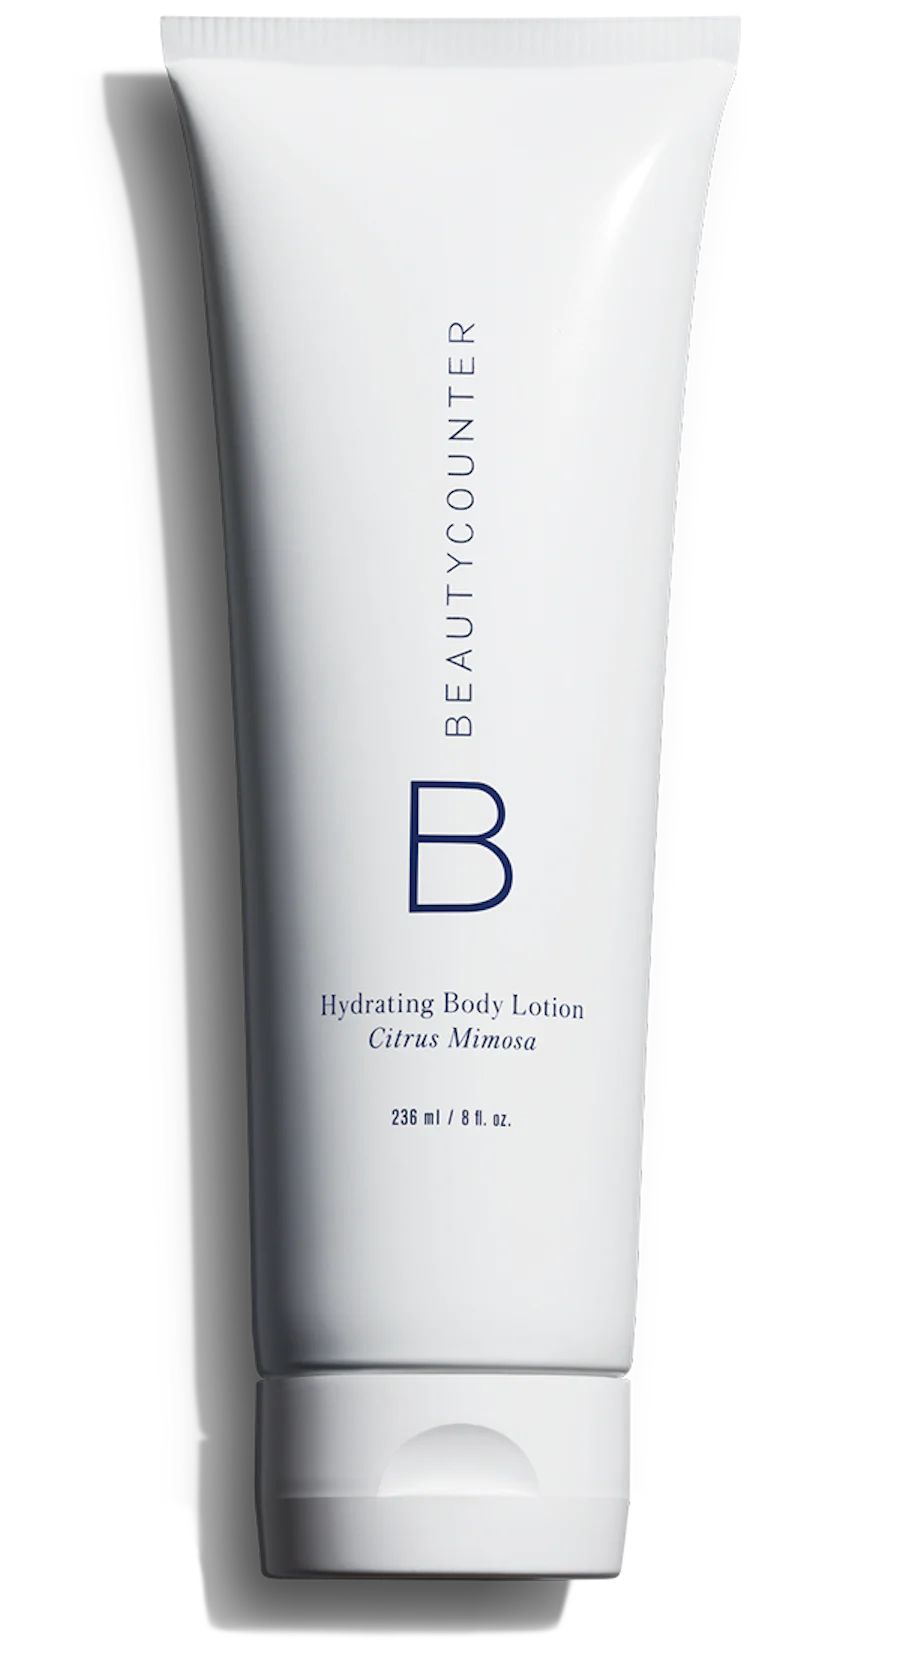 Hydrating Body Lotion in Citrus Mimosa | Beautycounter.com